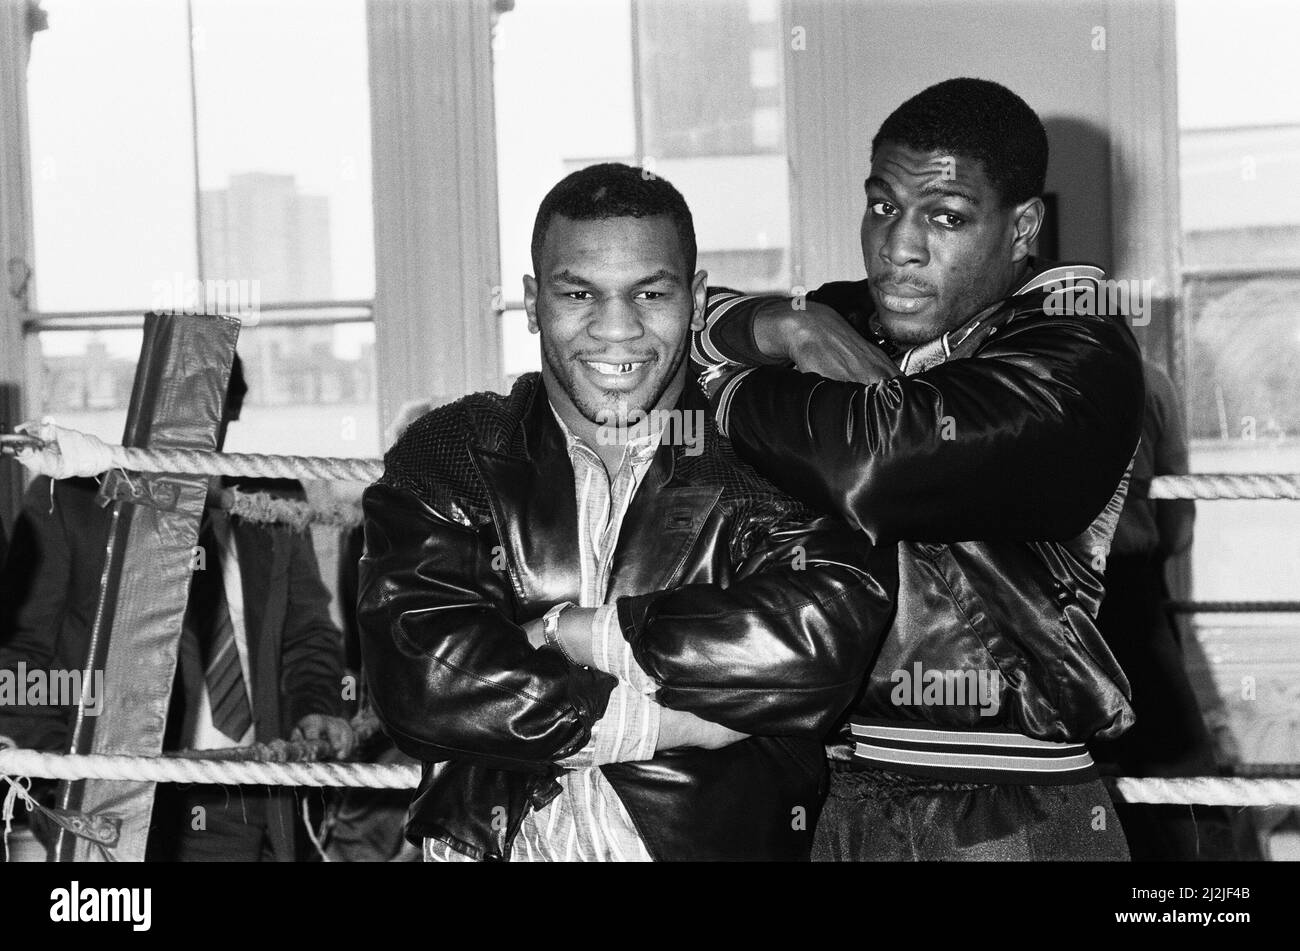 Mike Tyson meets Frank Bruno. Tyson's in London to see Frank Bruno against James 'Quick' Tillis.20th March 1987 Stock Photo